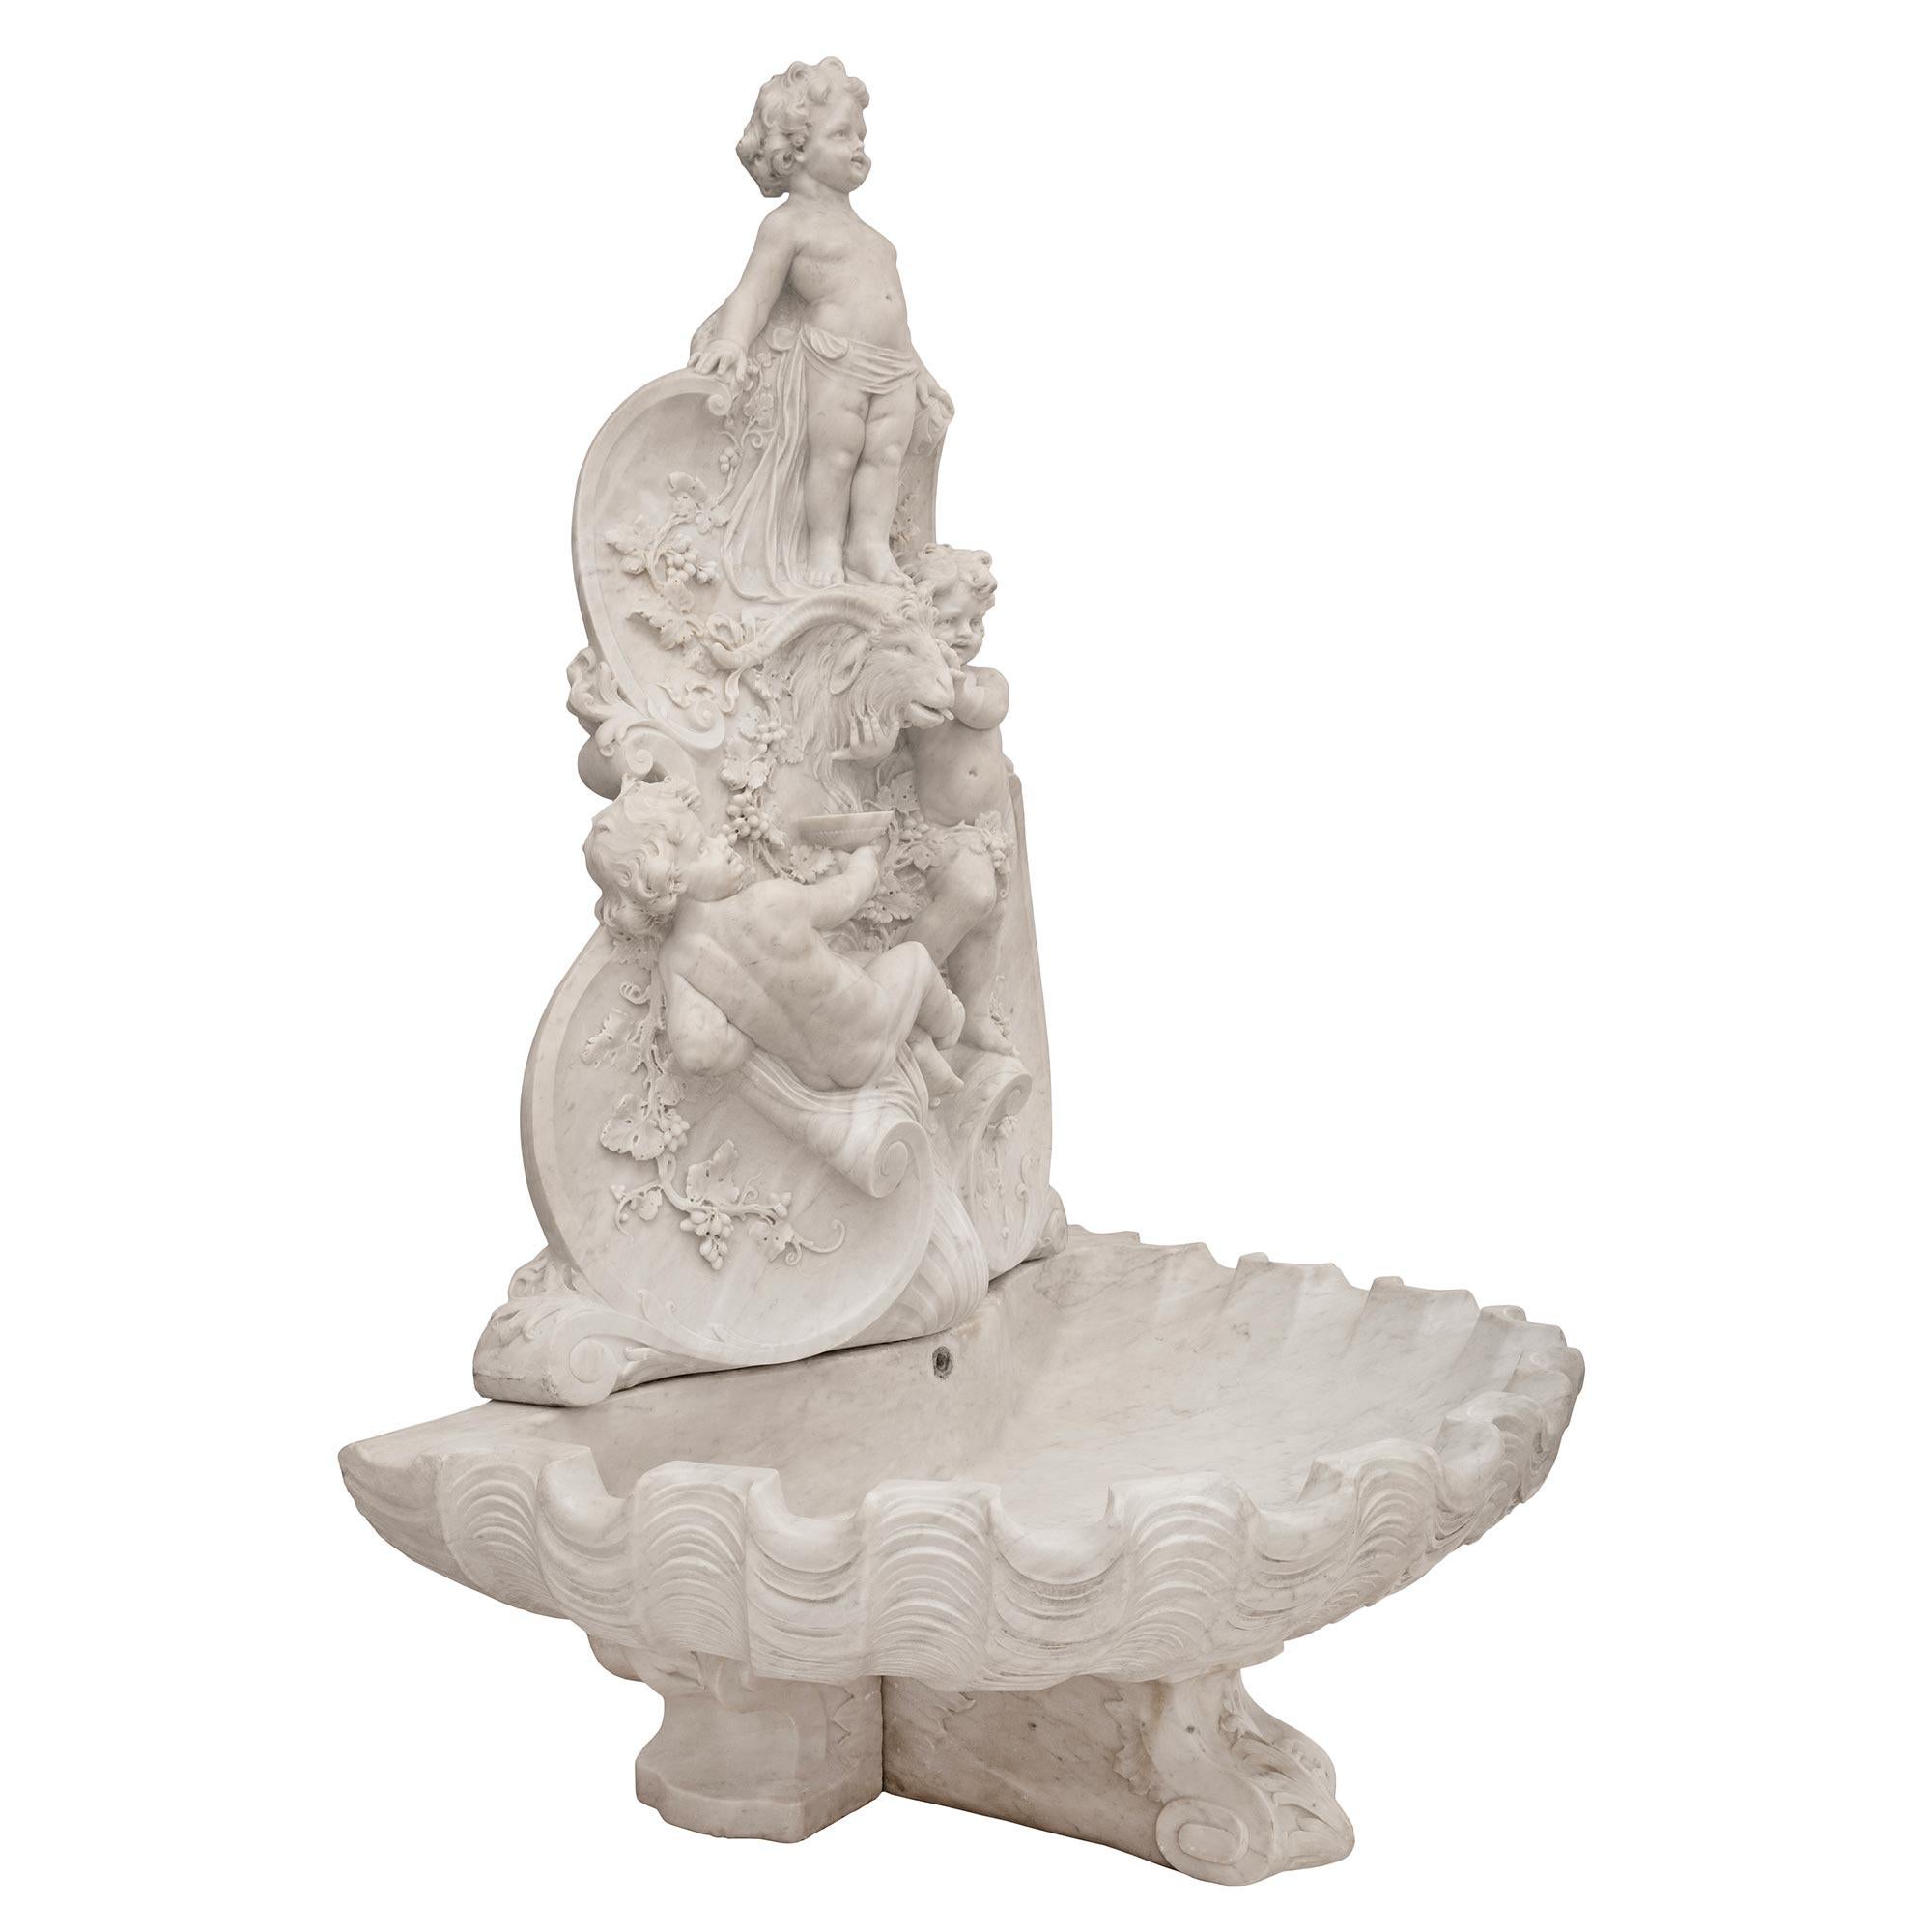 Italian 19th Century White Carrara Marble Fountain In Good Condition For Sale In West Palm Beach, FL